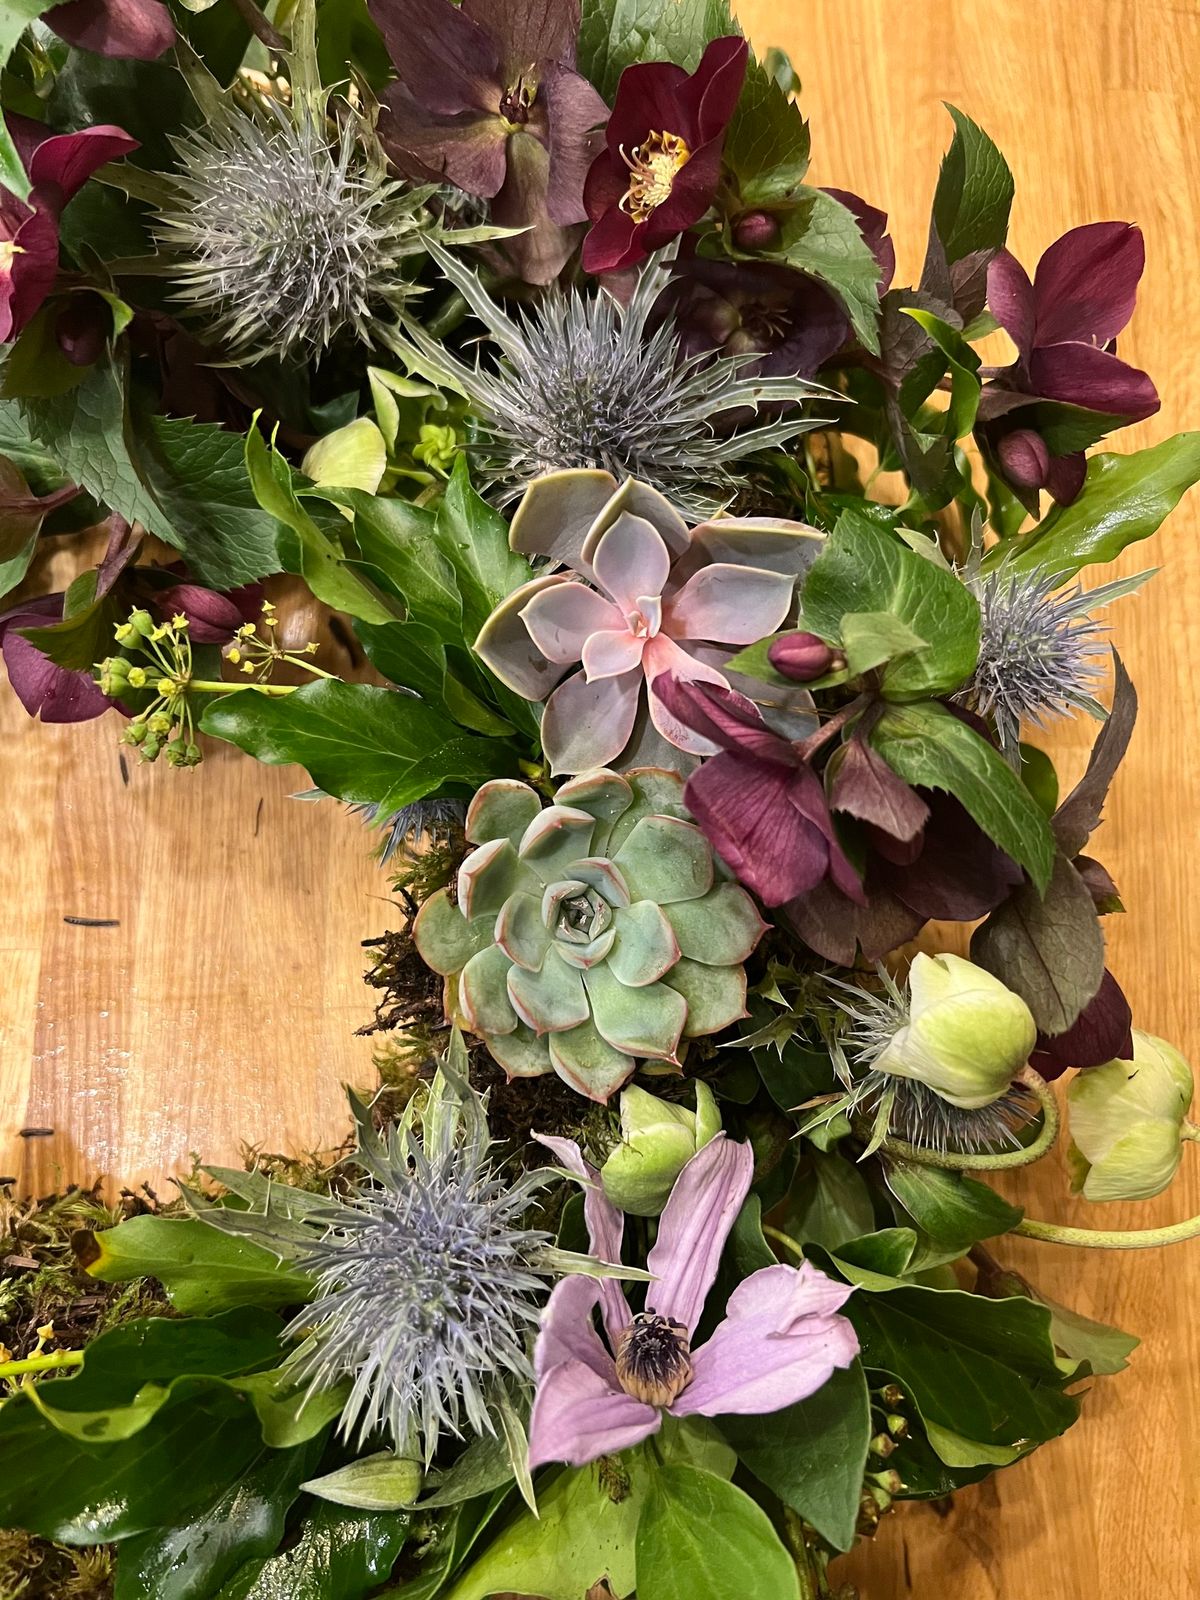 The Living Wreath Workshop now sold out